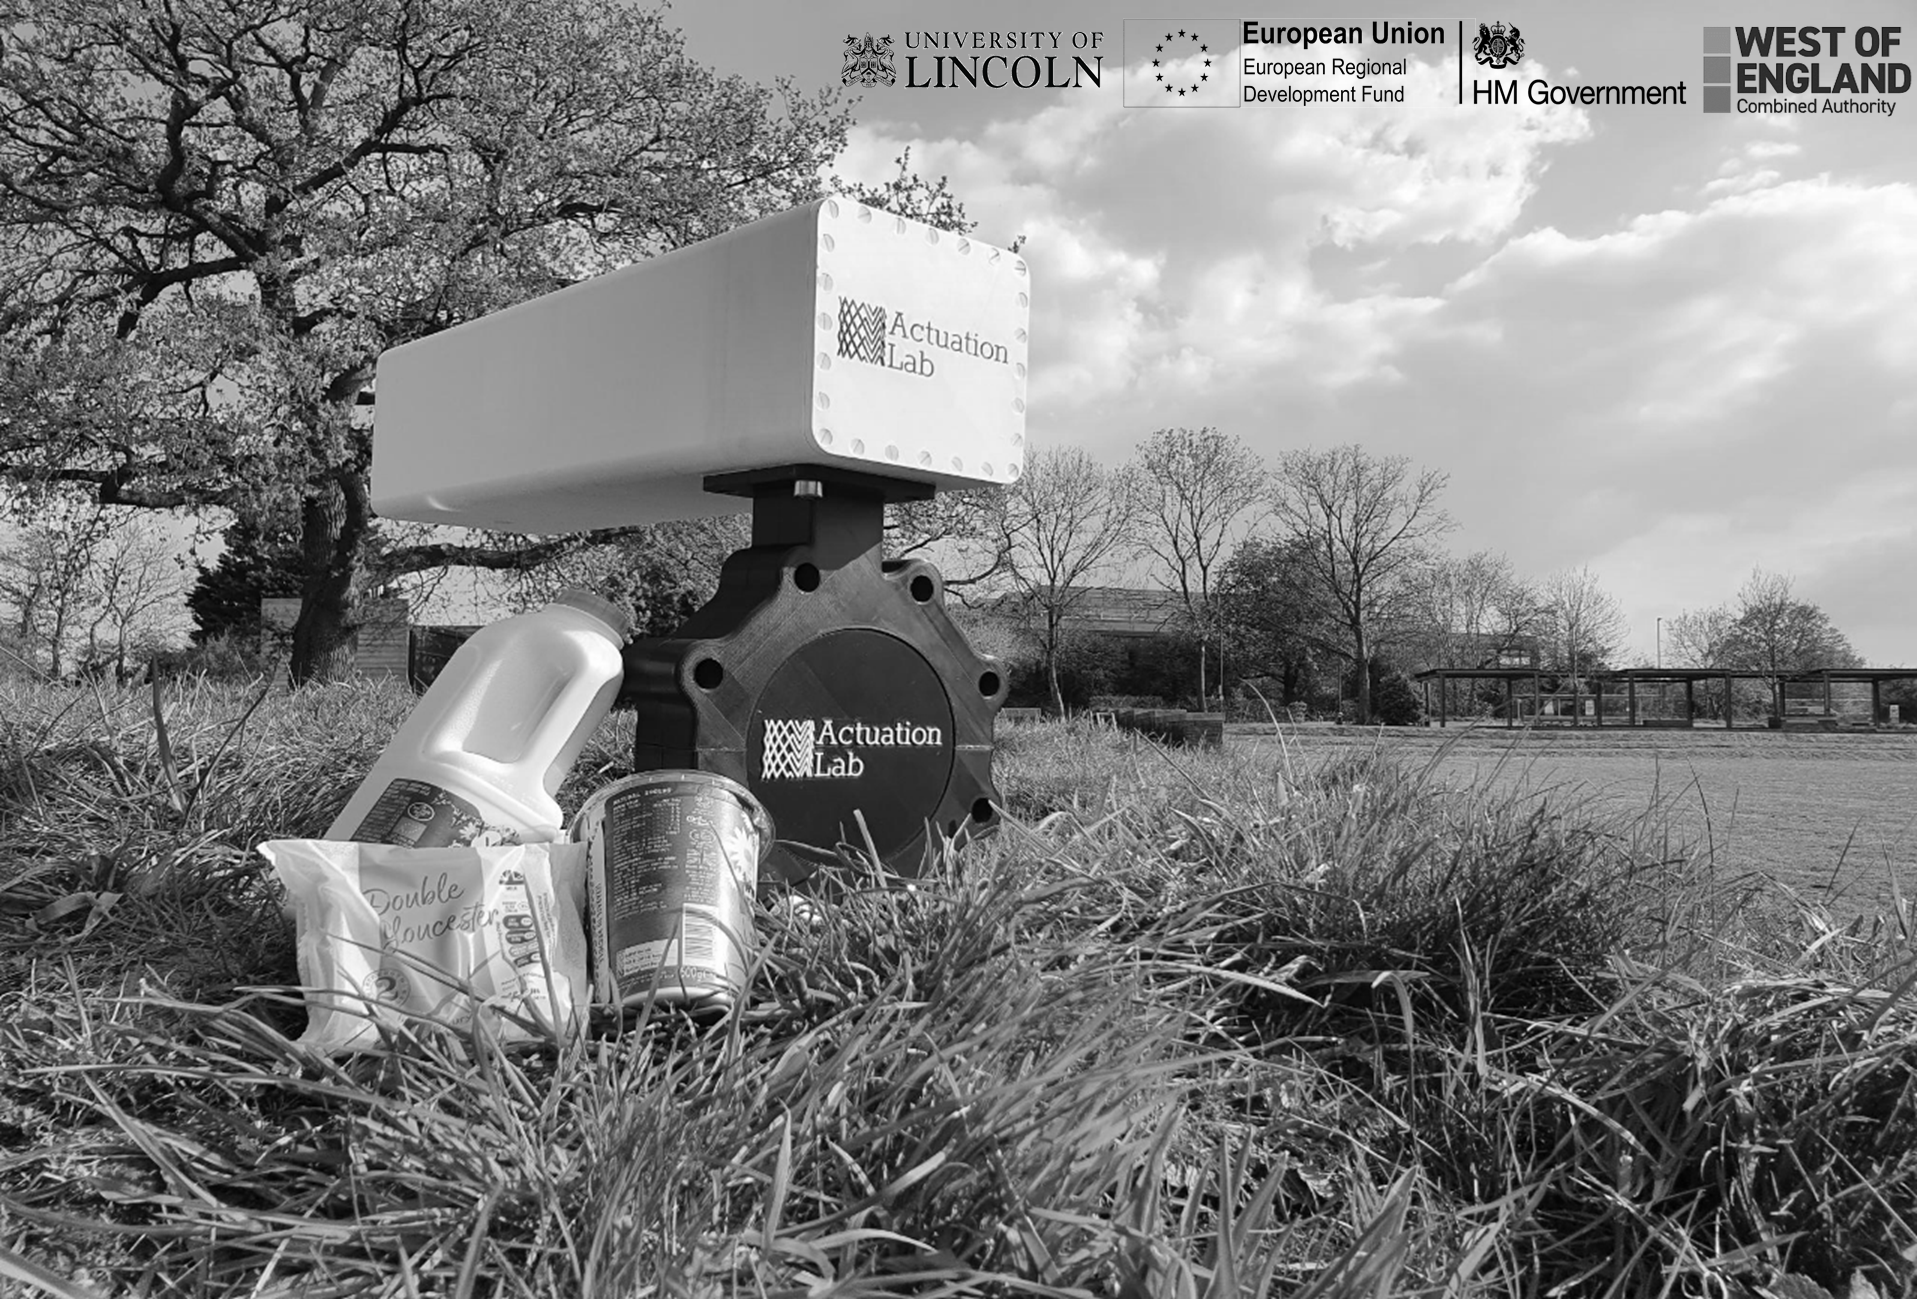 The Callimorph actuator in a field with dairy products